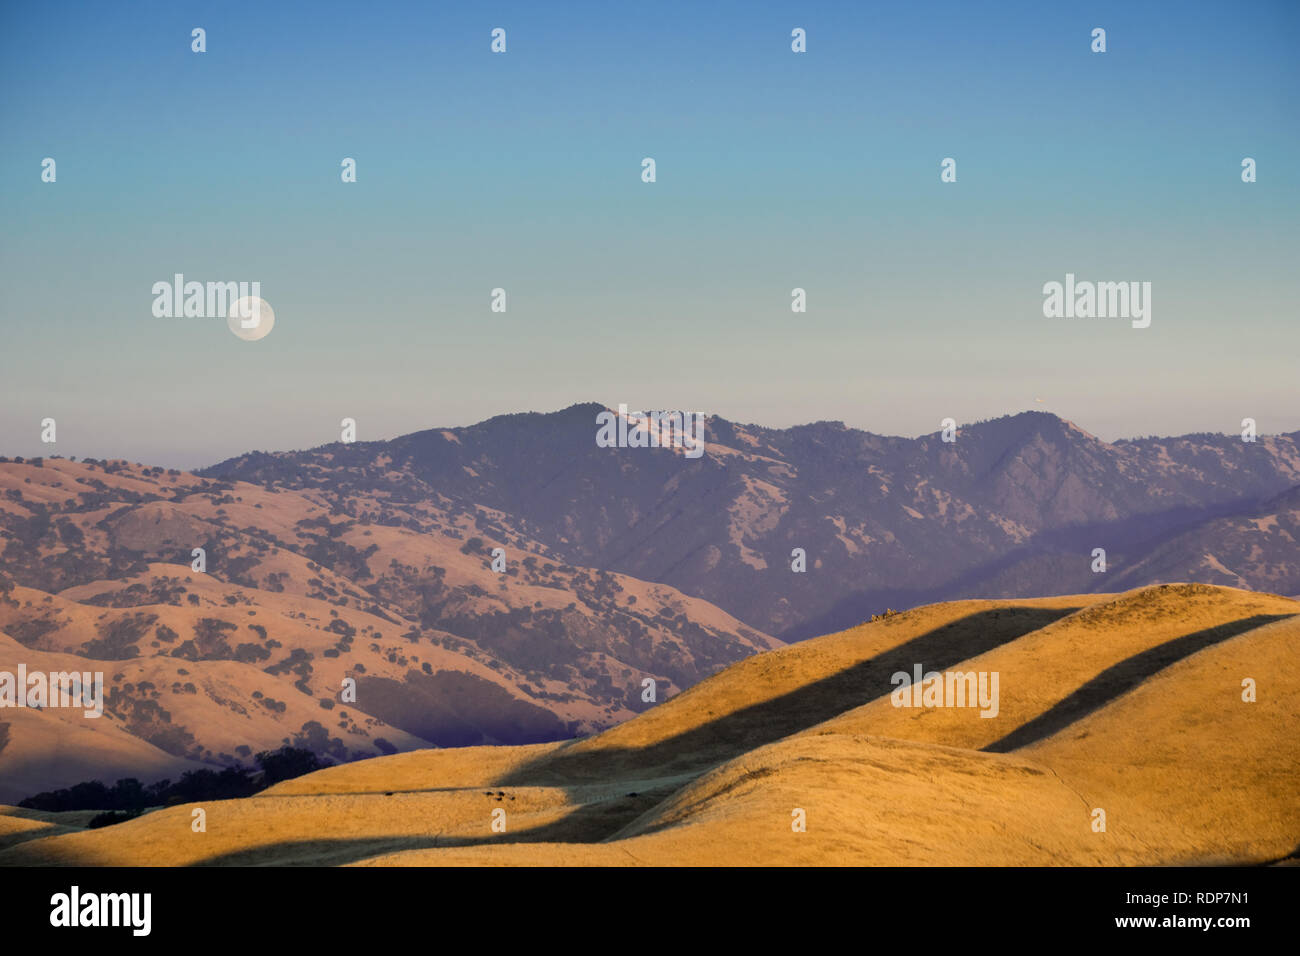 Golden hour and full moon rising over the hills and valleys of Ohlone Regional Wilderness, view from Mission Peak; south San Francisco bay area, Calif Stock Photo